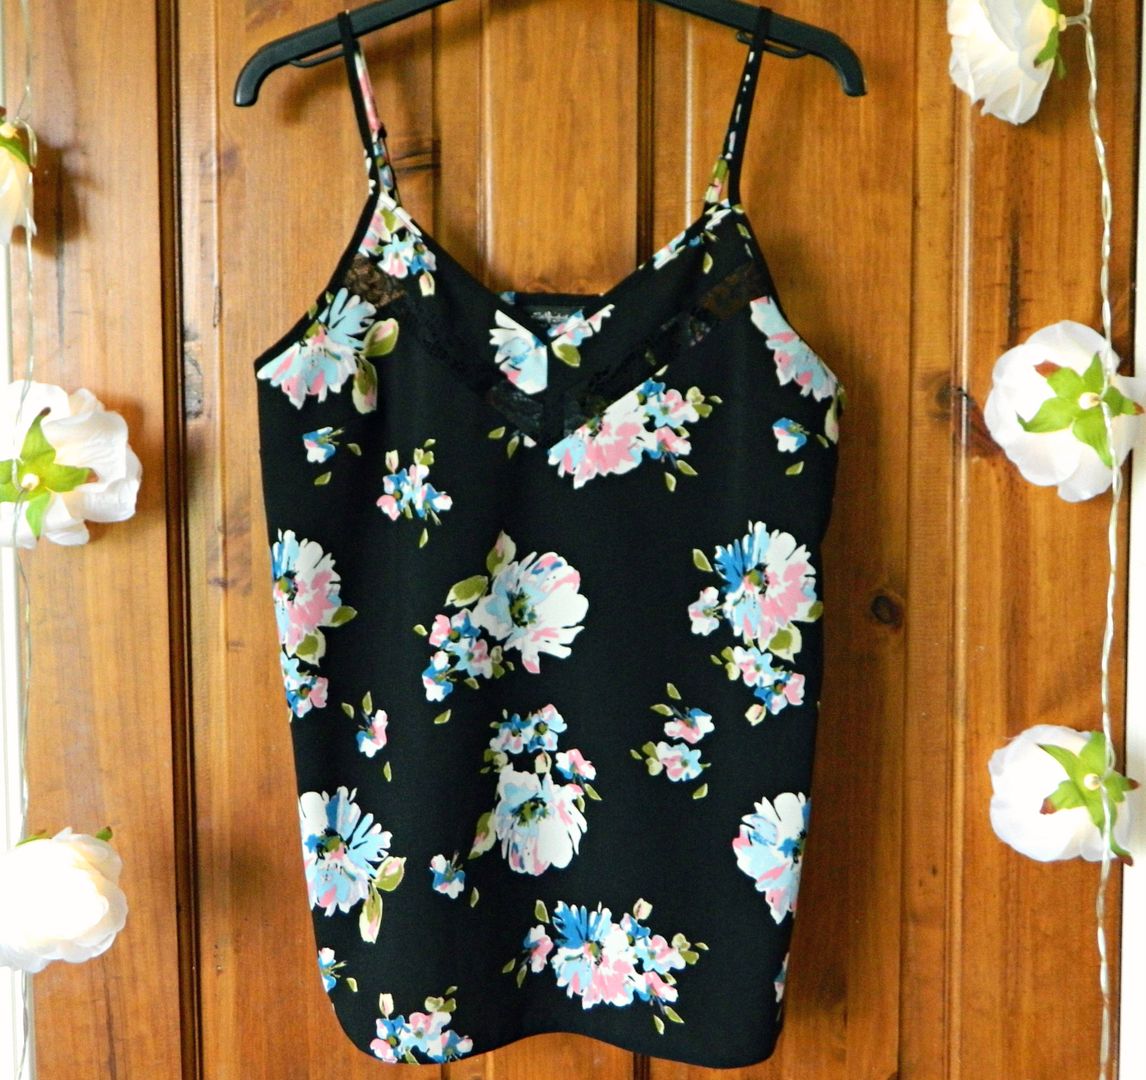 Spring Summer Fashion Accessories Haul 2014 Miss Selfridge Lace Floral Cami Belle-amie UK Beauty Fashion Lifestyle Blog